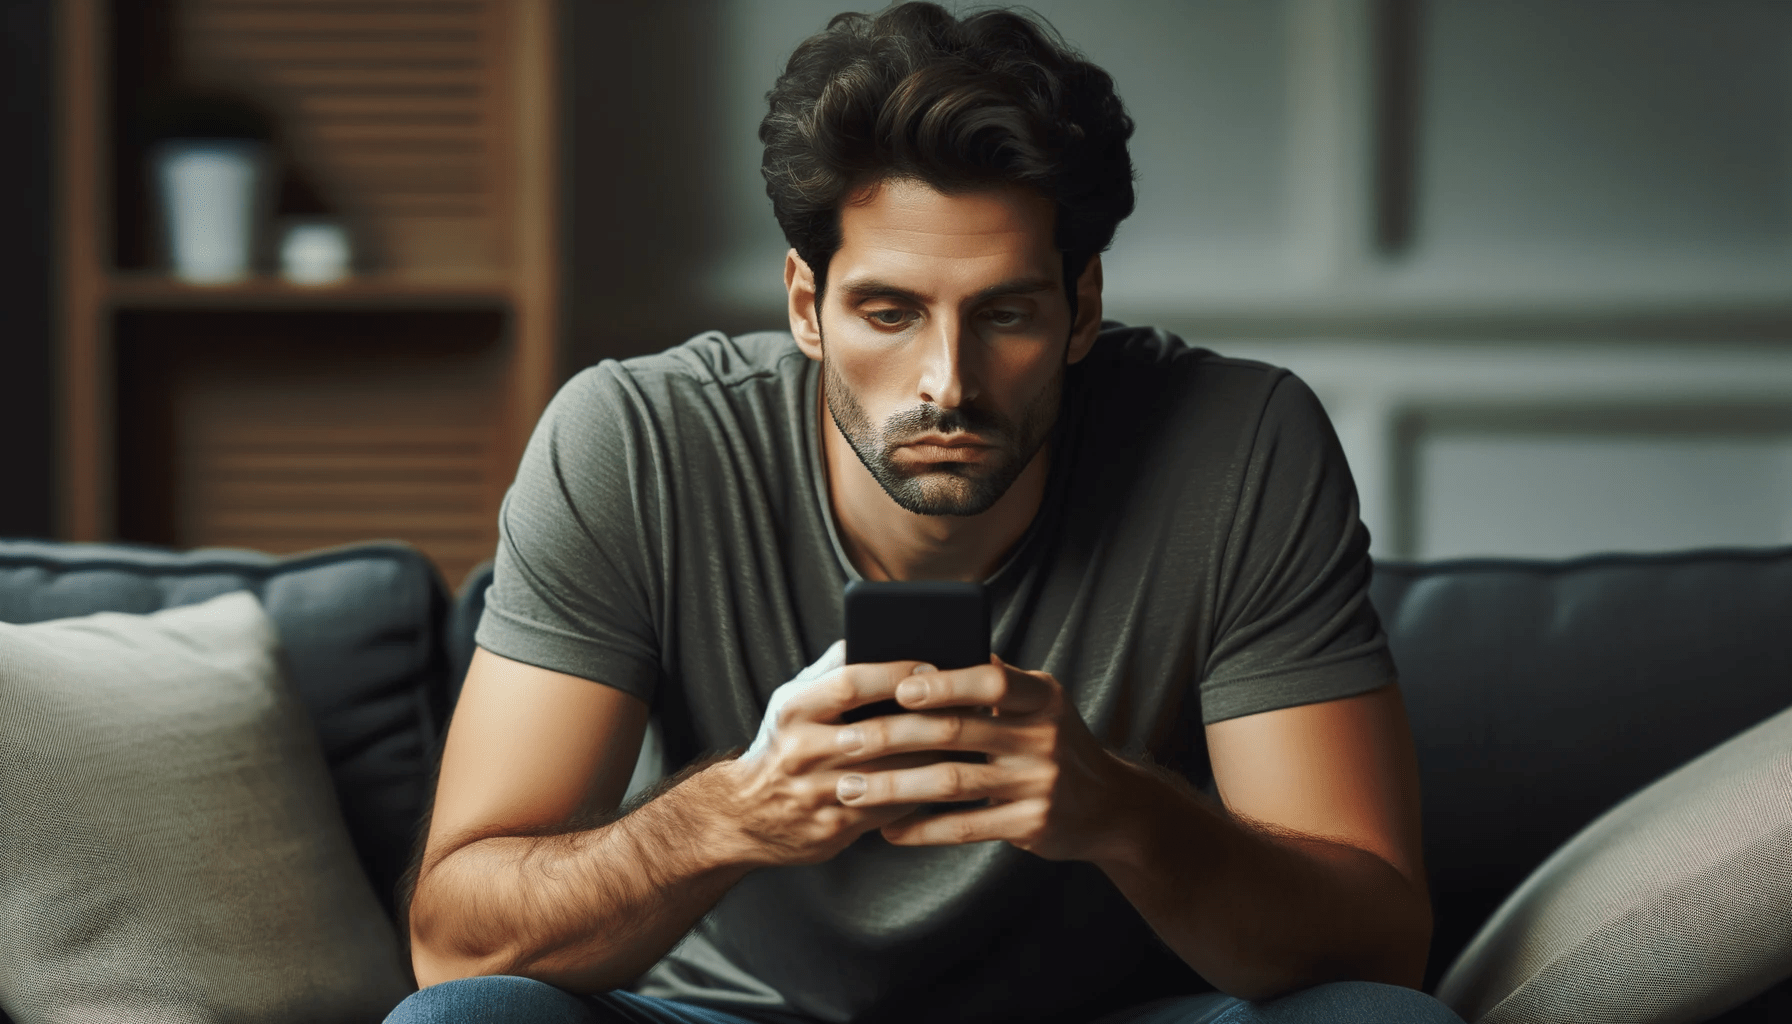 Photo of a man sitting on a couch engrossed in texting on his phone with a completely expressionless face portraying a sense of disintere